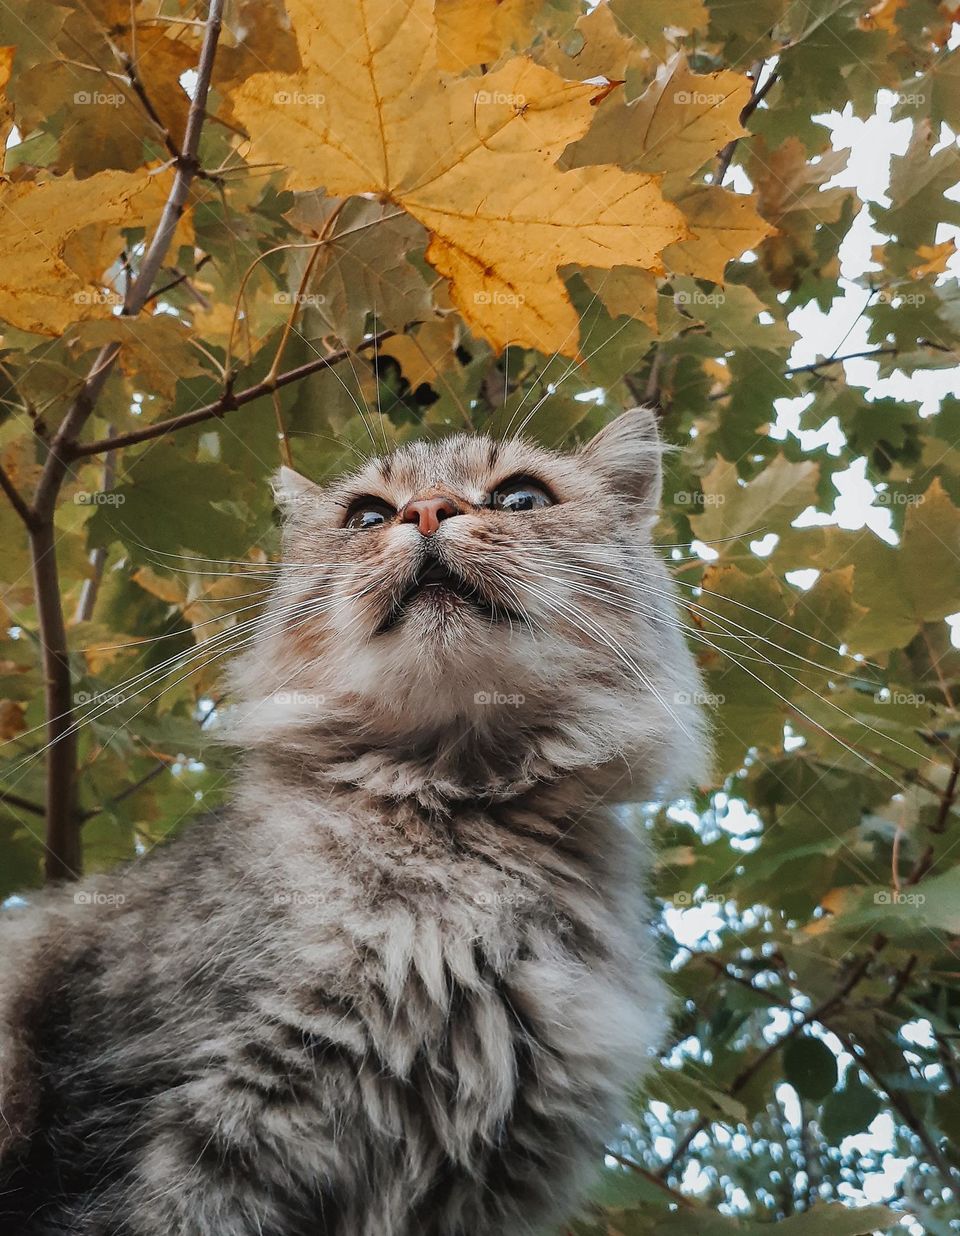 aesthetic photo of a village cat on the background of an autumn maple tree with yellow and green leaves